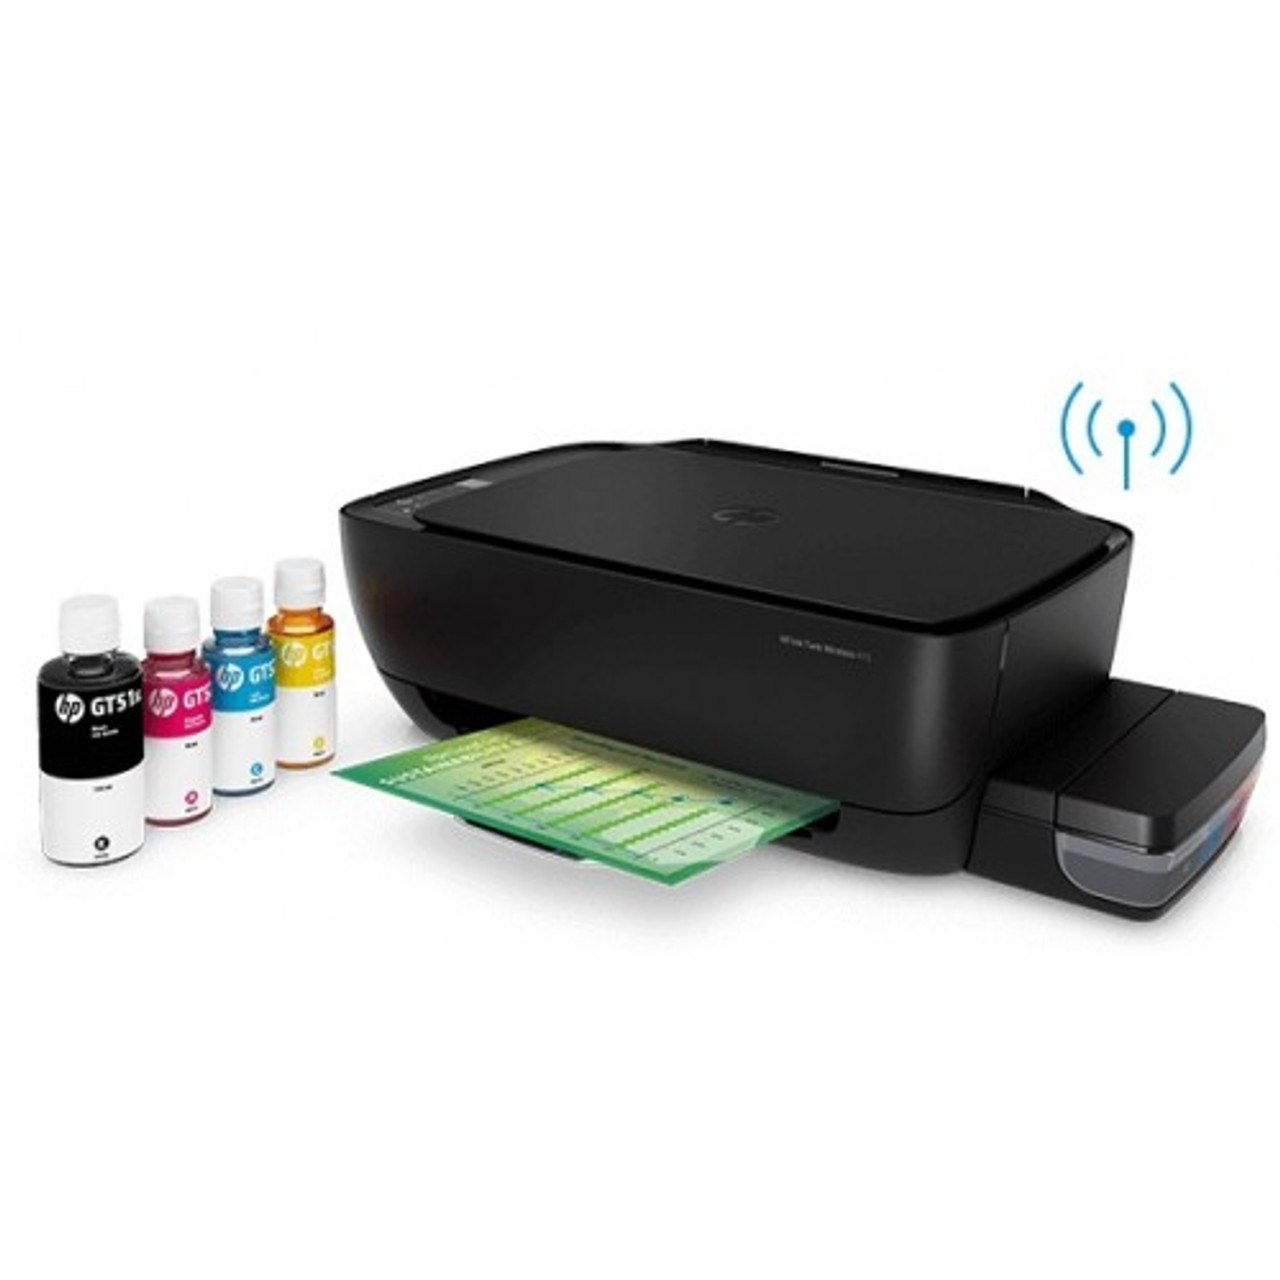 HP ink tank 415 Scan/print/copy up to a4 size and wireless printing Php  7,790.00 